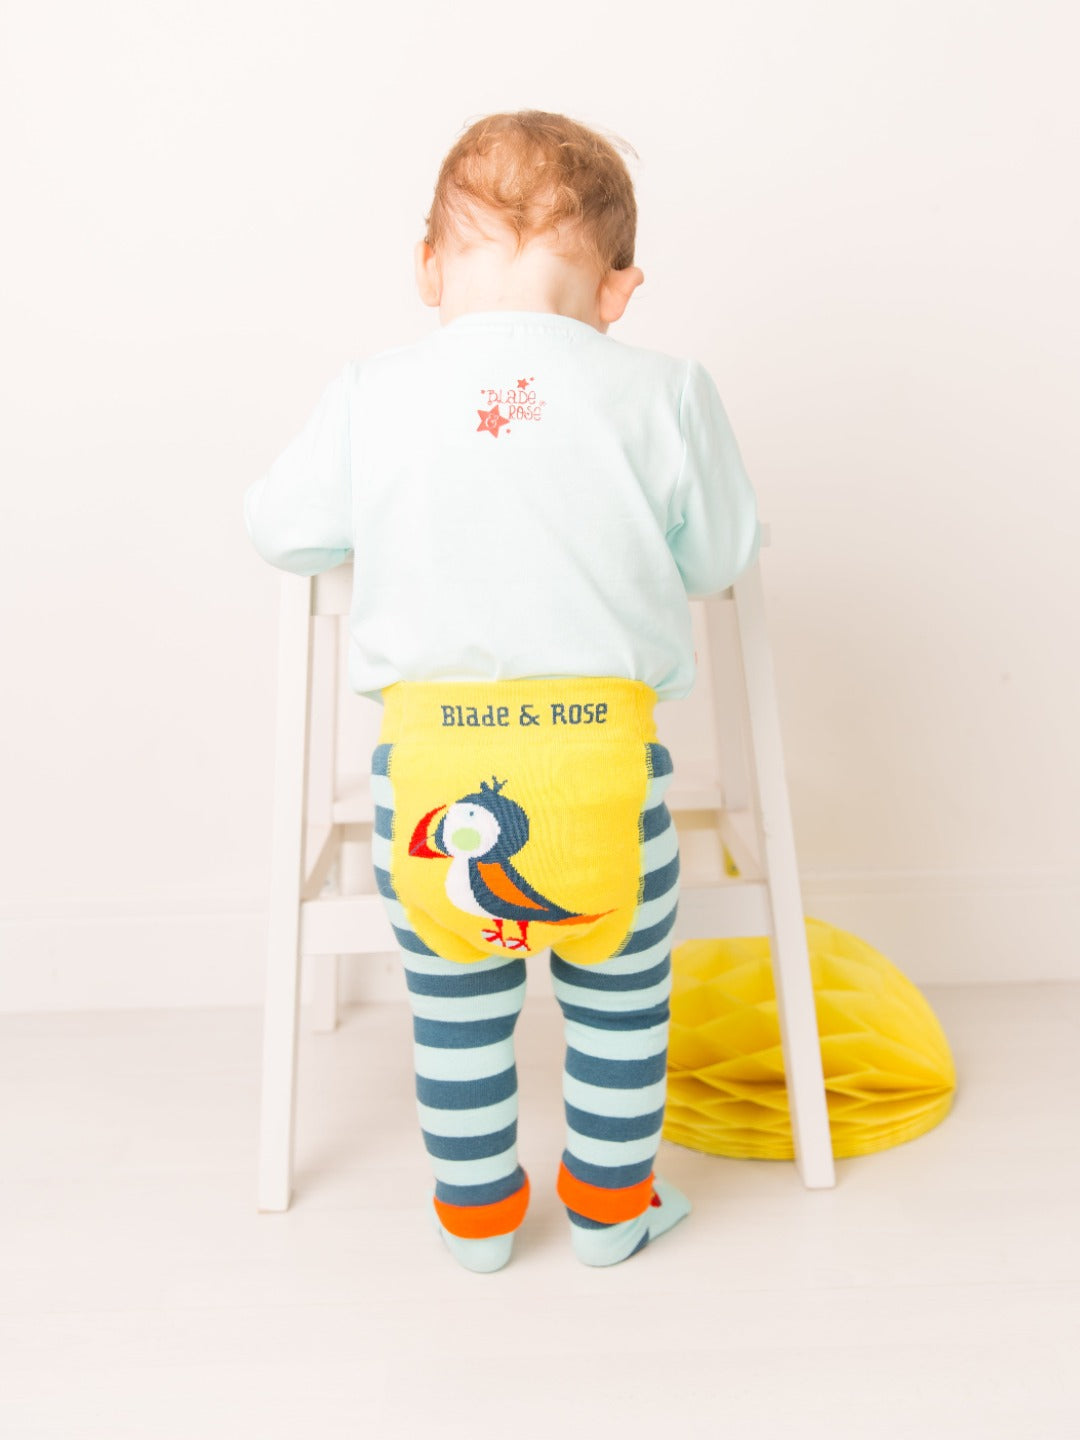 Blade & Rose - Did you know our leggings are the perfect fit for cloth  nappies? Share the news with friends #bladeandrose #clothnappies #leggings  #babystyle #childrenswear #fox #twins